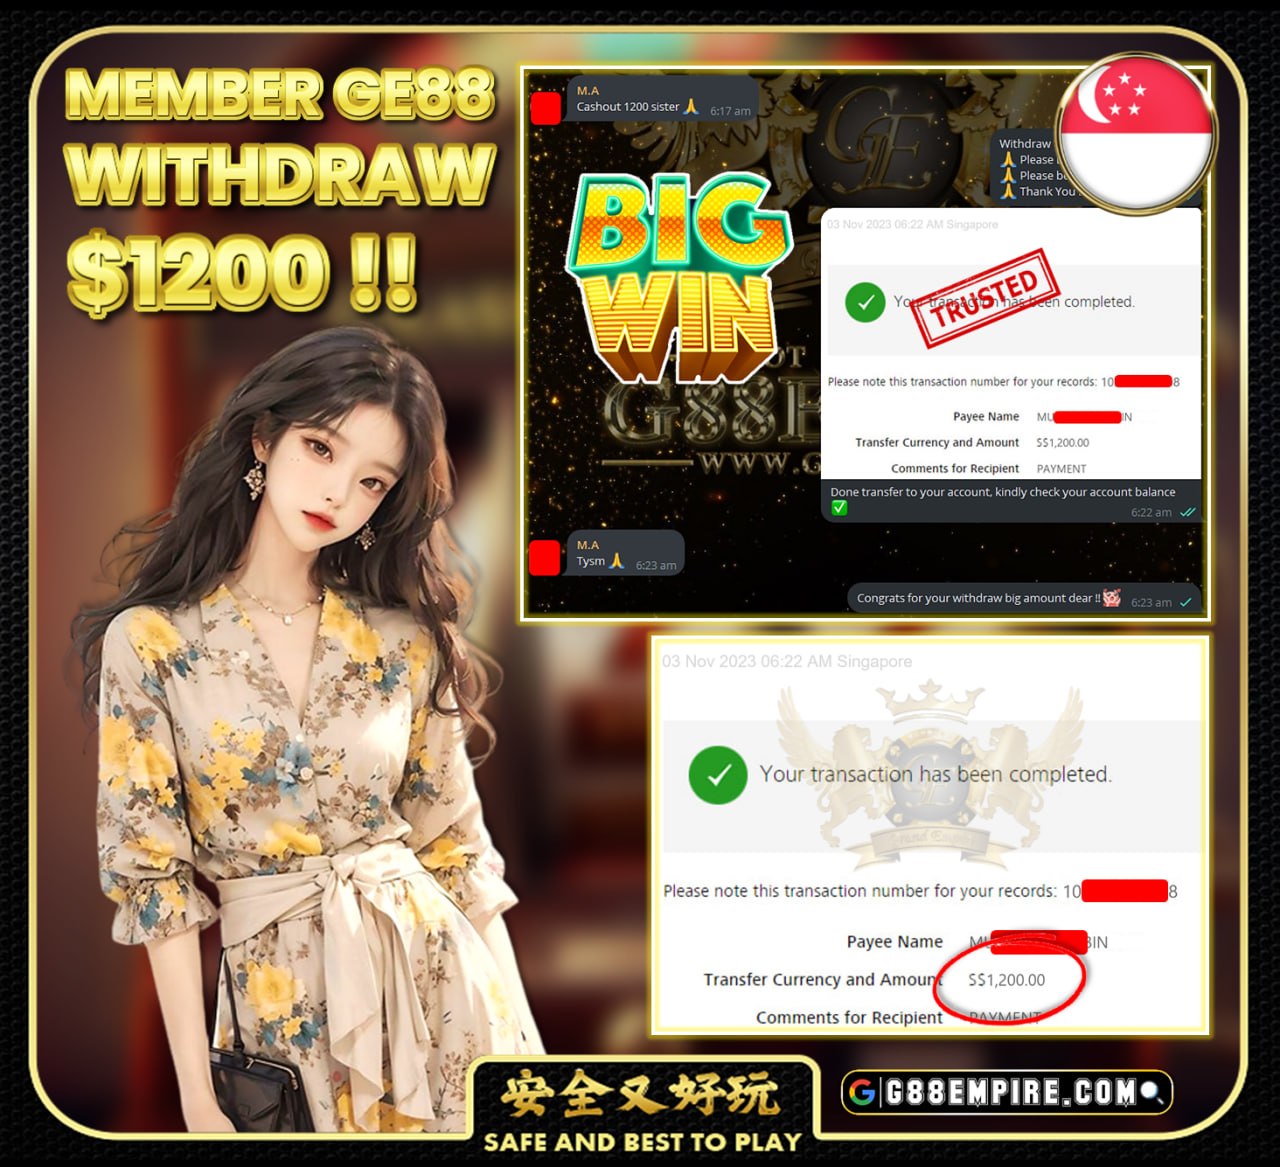 PUSSY888 ~ GREAT88 CASHOUT SGD1200!!